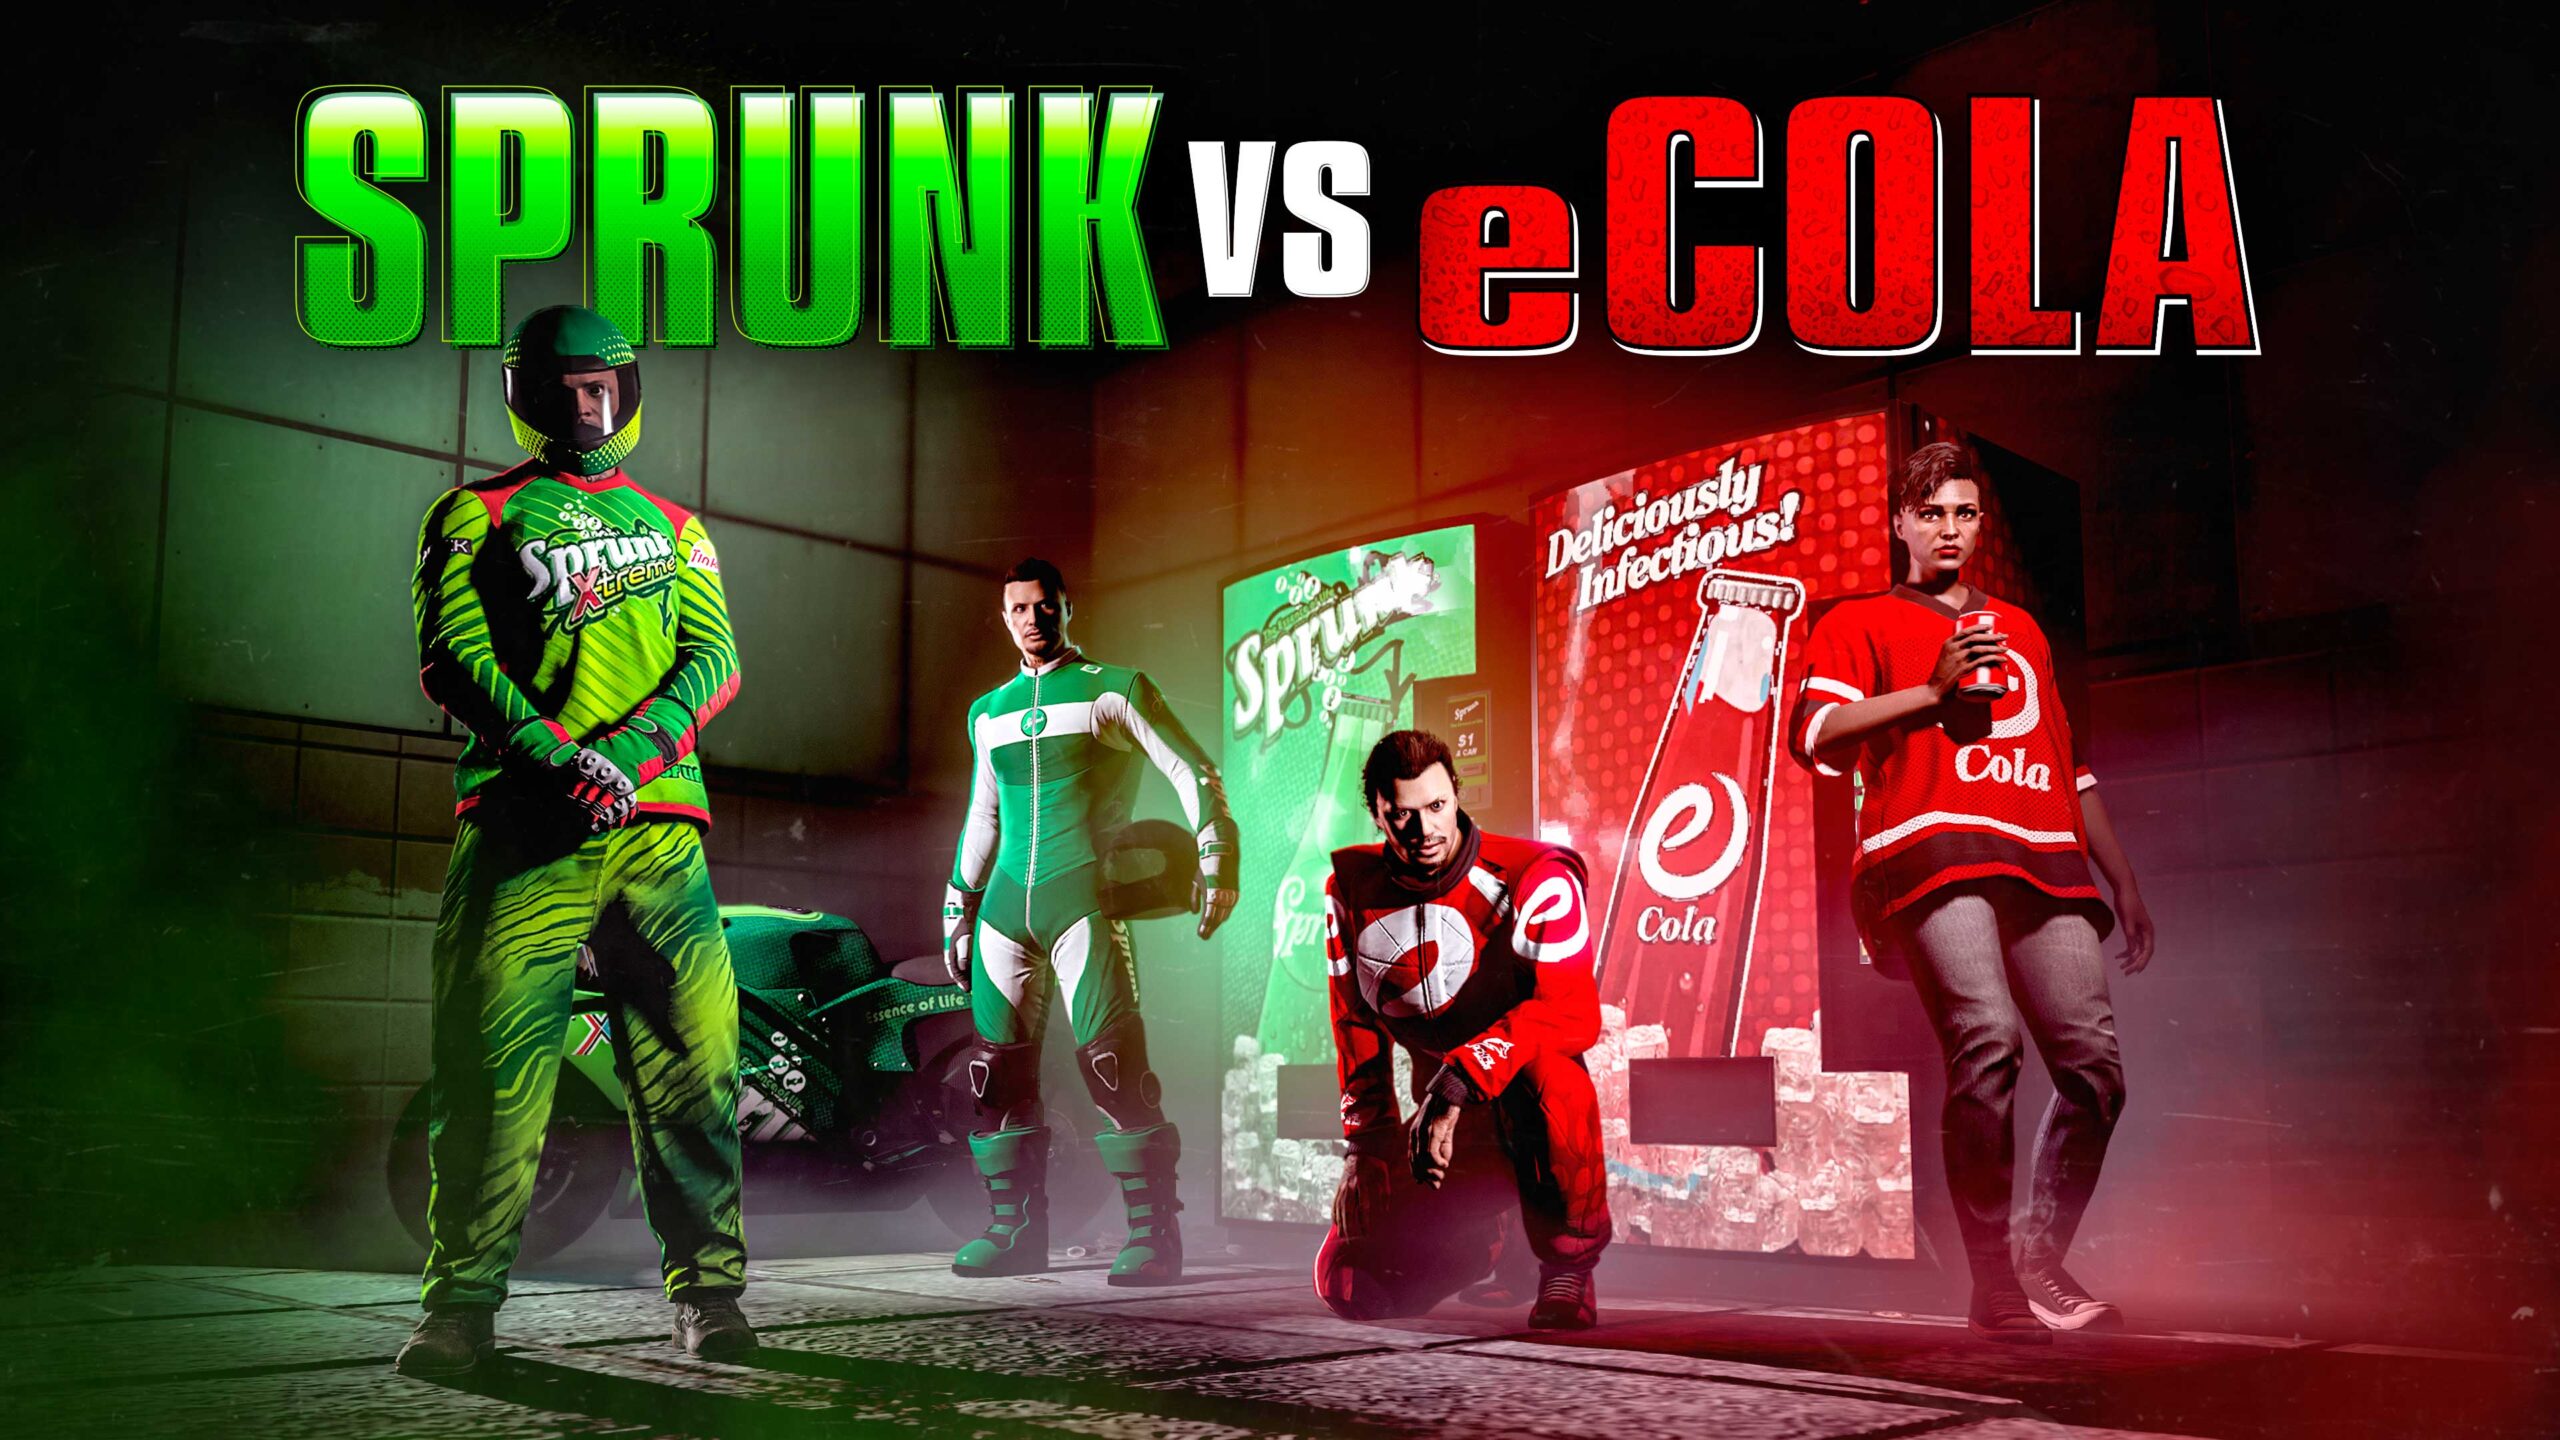 Poster featuring SPrunk vs. eCola and GTA Online characters in front of vending machines